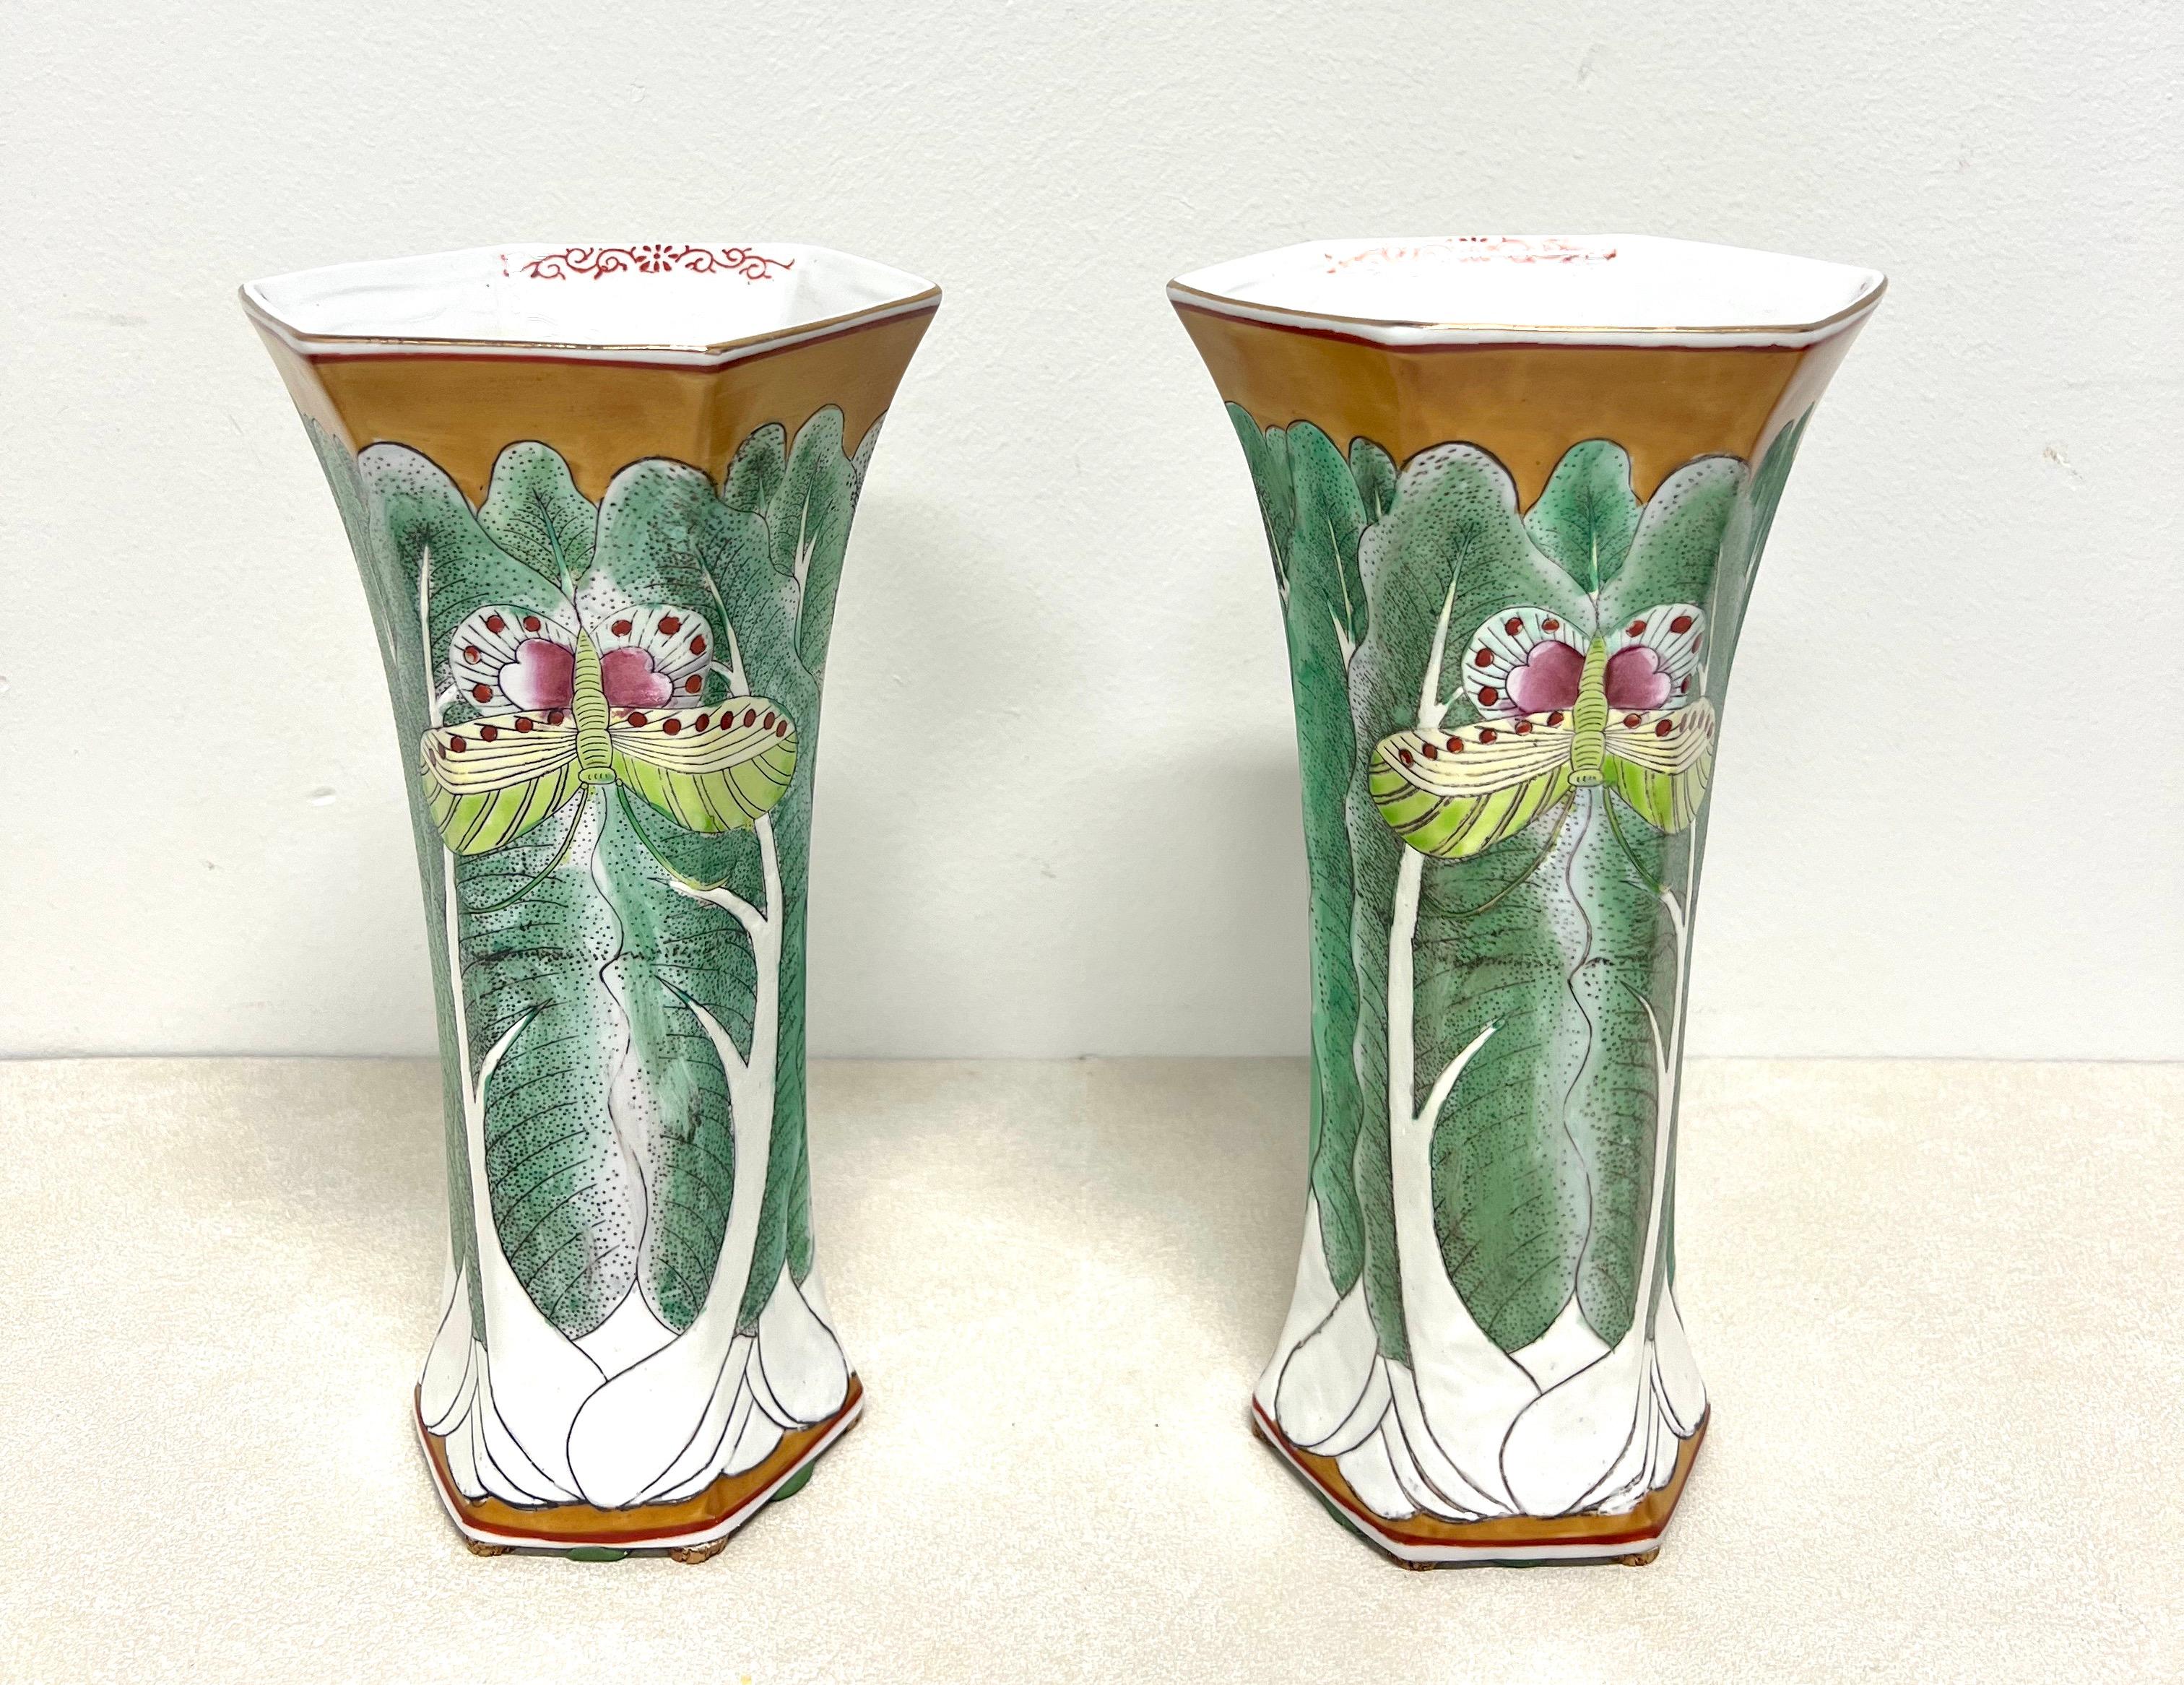 A pair of Asian Chinoiserie style table vases by Andrea by Sadek. Hand painted famille vert porcelain with vivid colors, primarily greens, depicting bok choy & butterflies, gold trim, and a hexagonal shape. Made in China, in the late 20th